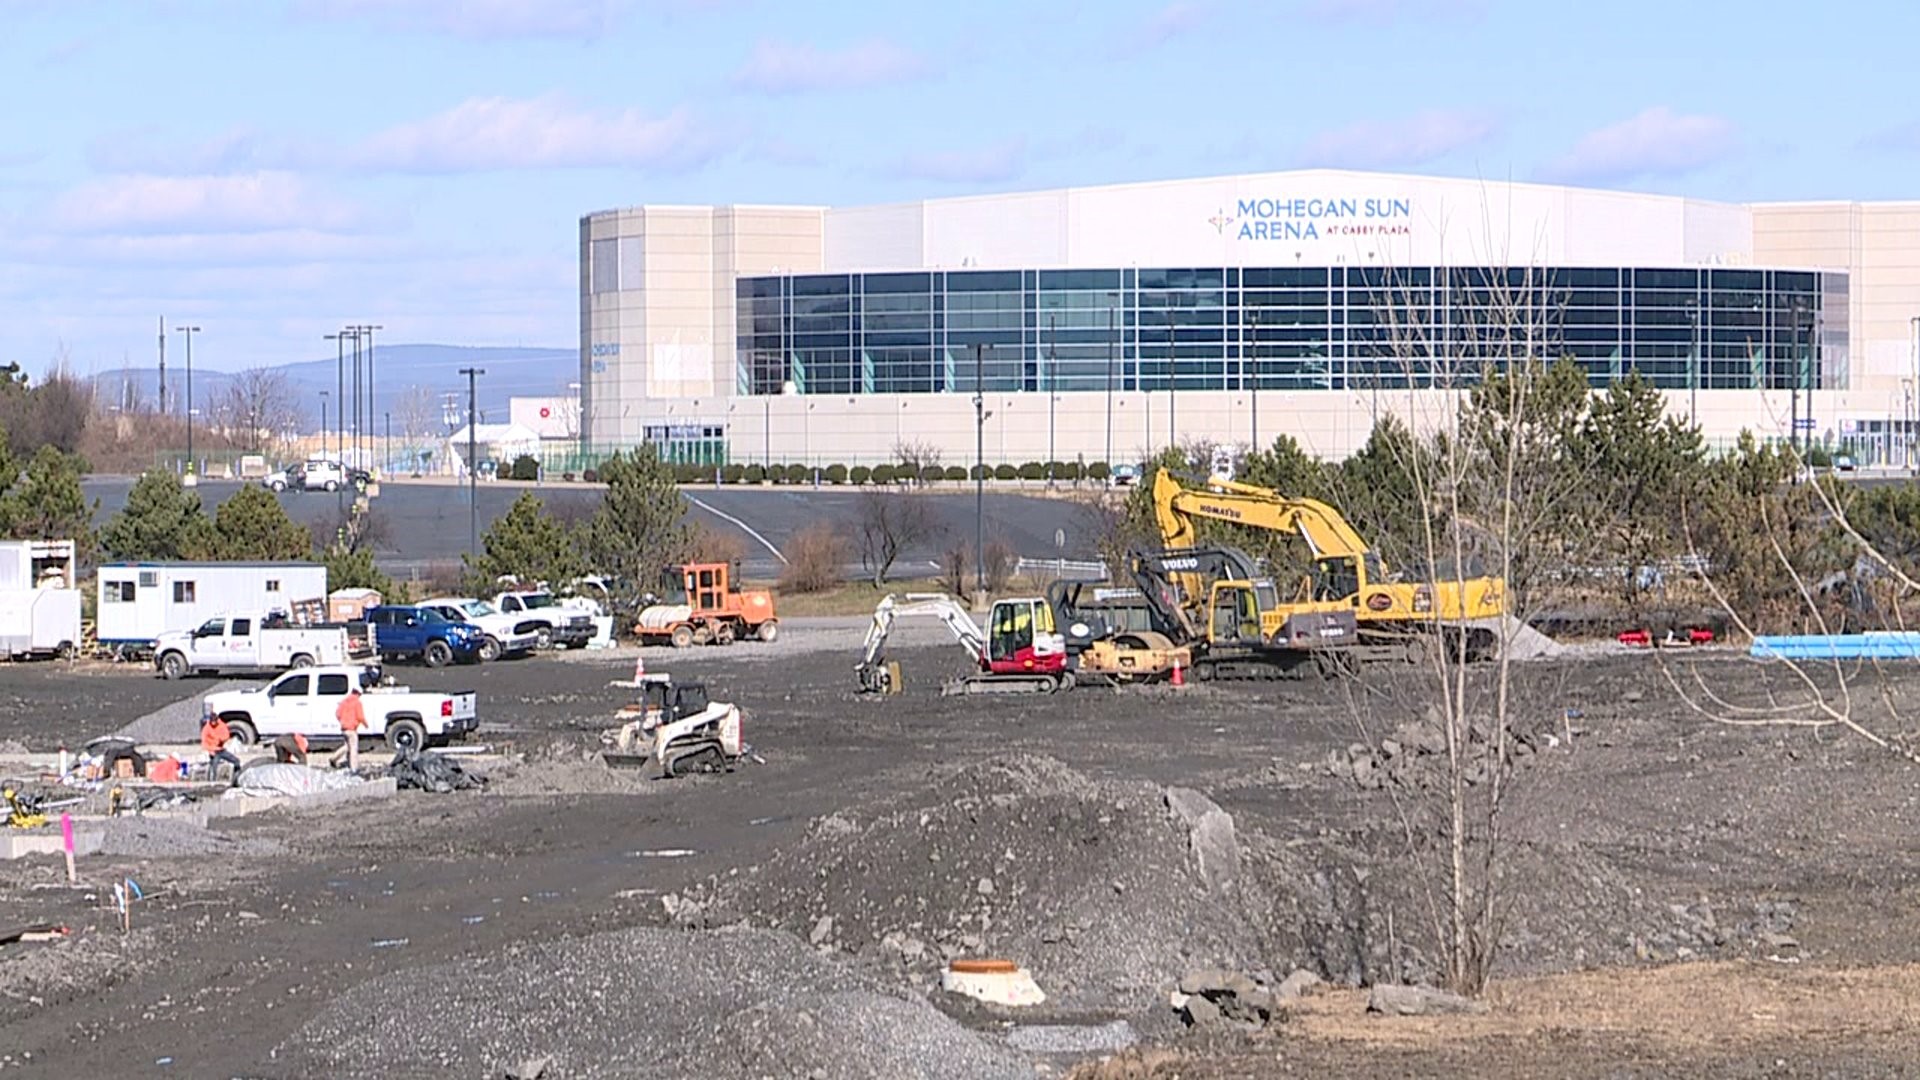 Construction has begun on two new hotels in one Luzerne County community, but not everyone is welcoming the additions.